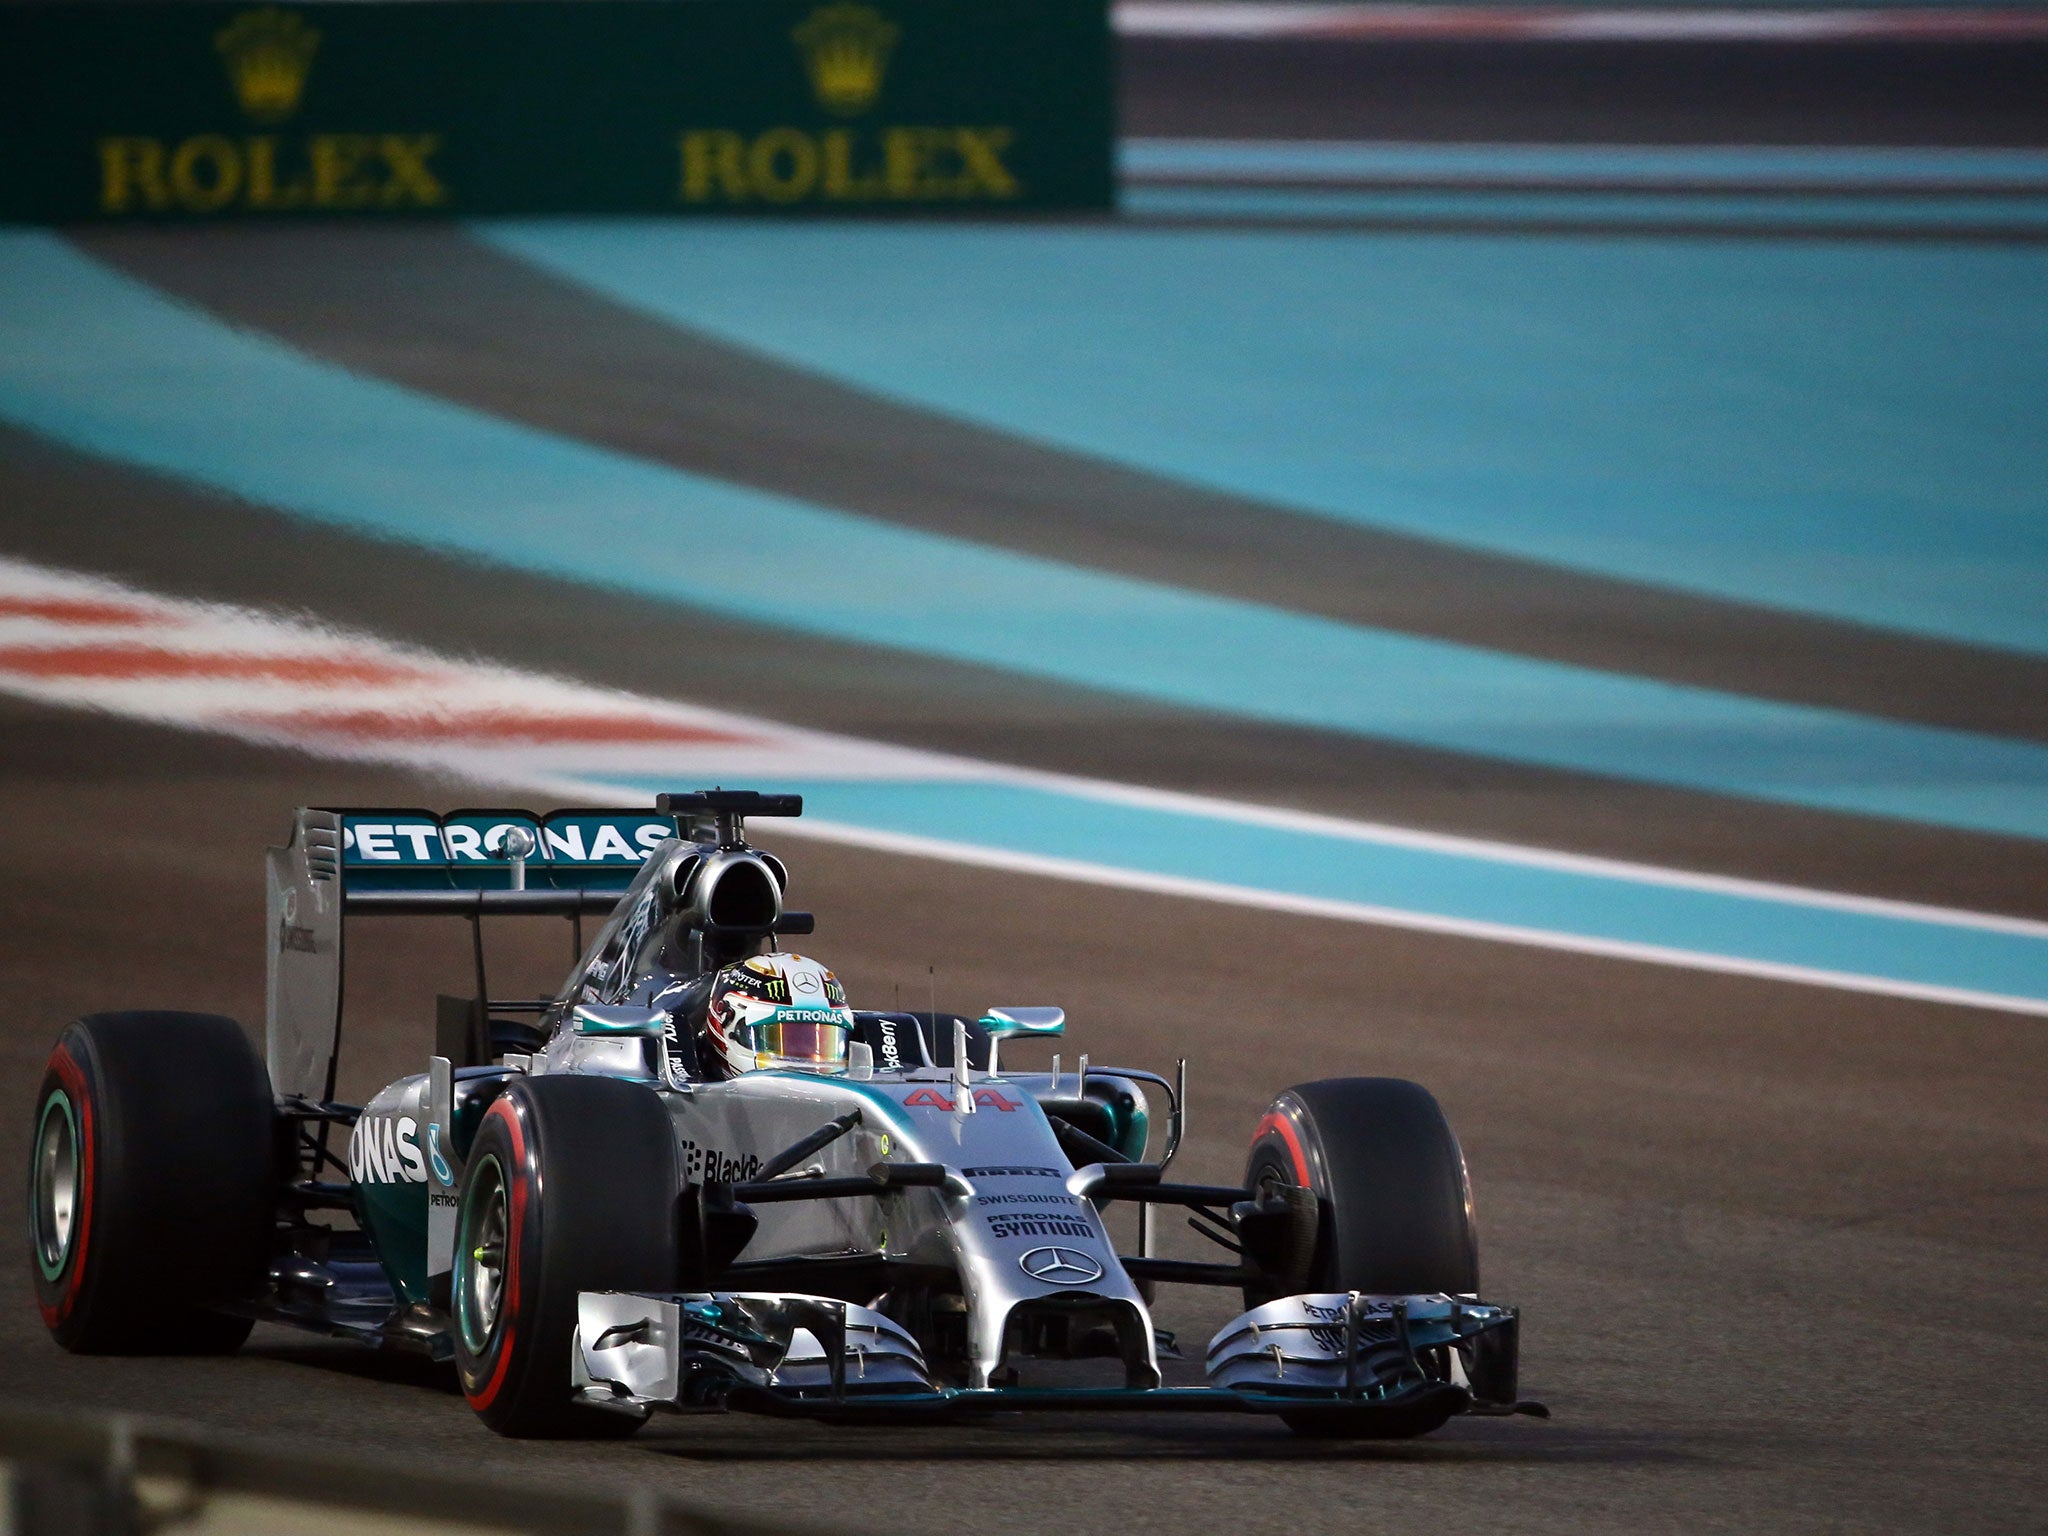 Hamilton edged out Rosberg in the first practice session